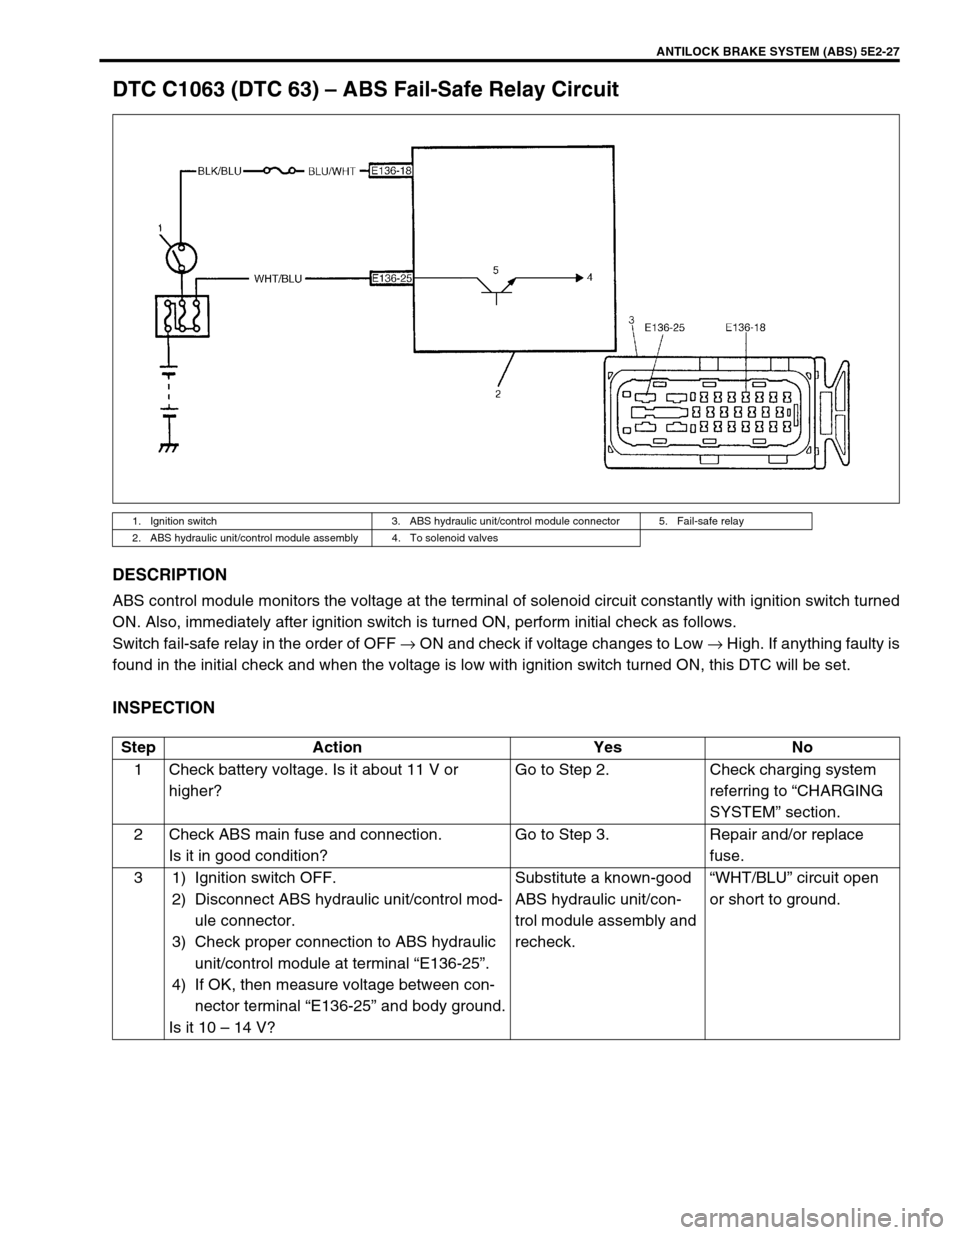 SUZUKI GRAND VITARA 2001 2.G Owners Guide ANTILOCK BRAKE SYSTEM (ABS) 5E2-27
DTC C1063 (DTC 63) – ABS Fail-Safe Relay Circuit
DESCRIPTION
ABS control module monitors the voltage at the terminal of solenoid circuit constantly with ignition s